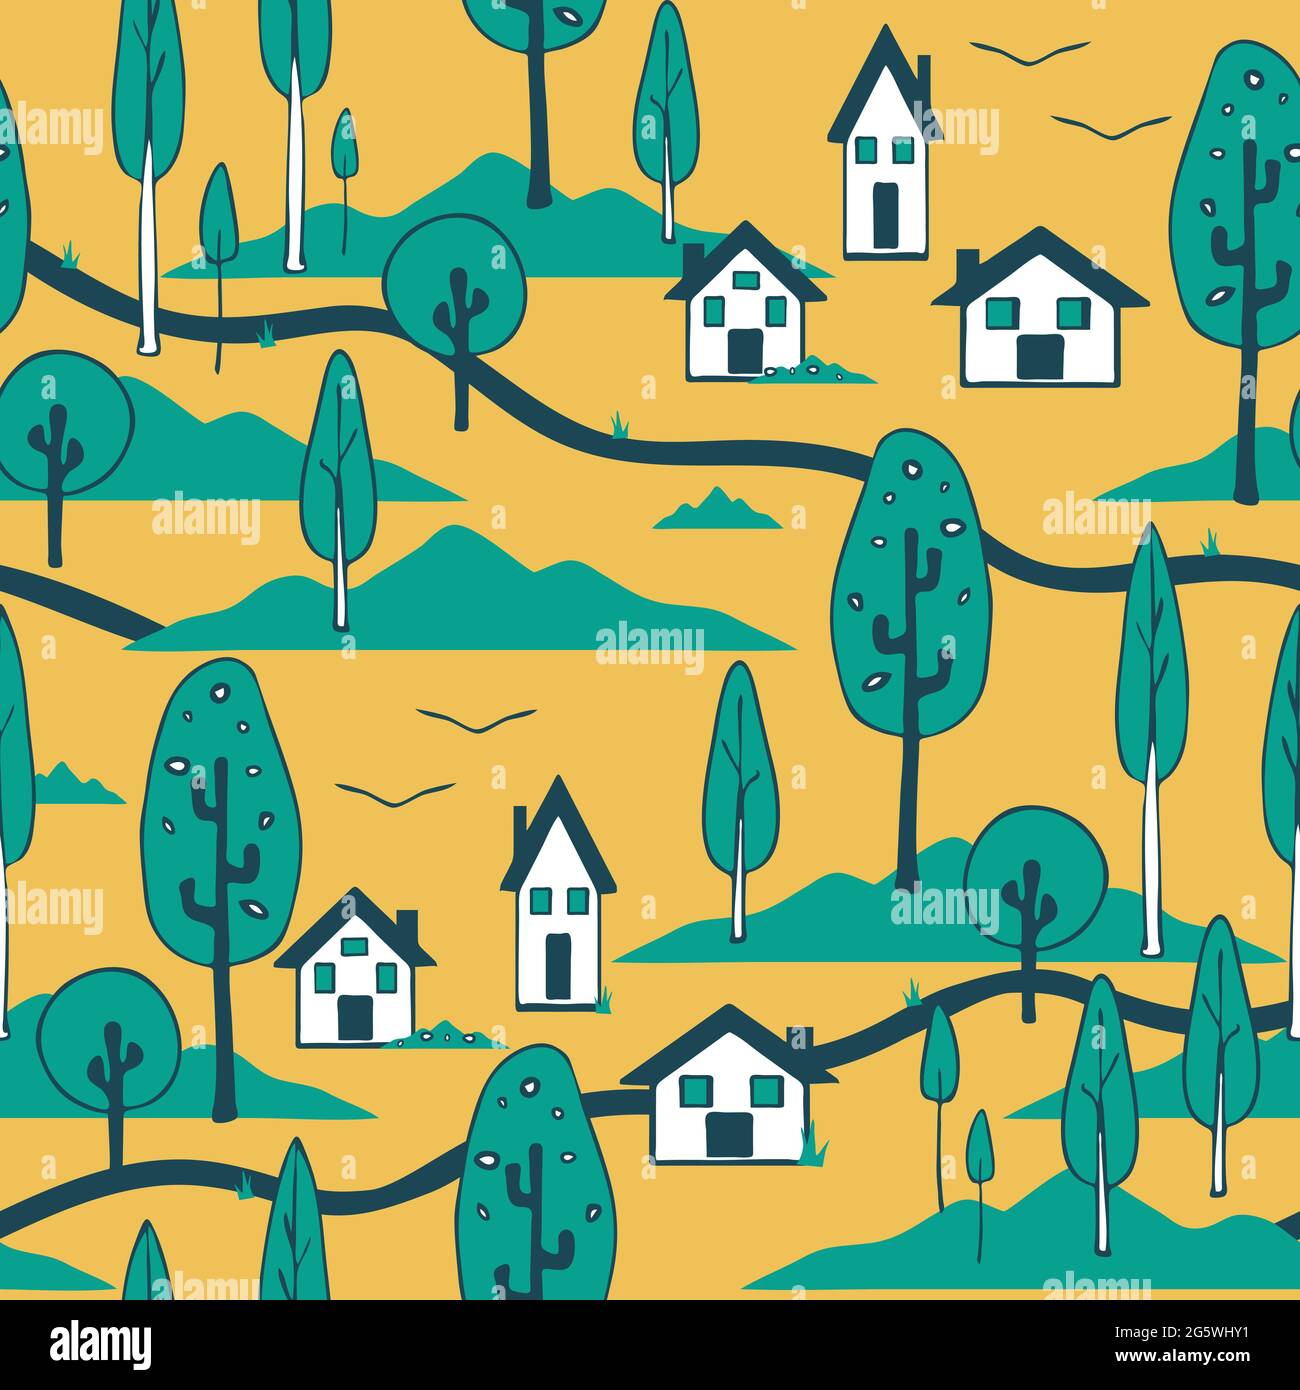 Seamless vector pattern with houses and trees on yellow background. Country home landscape wallpaper design. Decorative rural fashion textile. Stock Vector